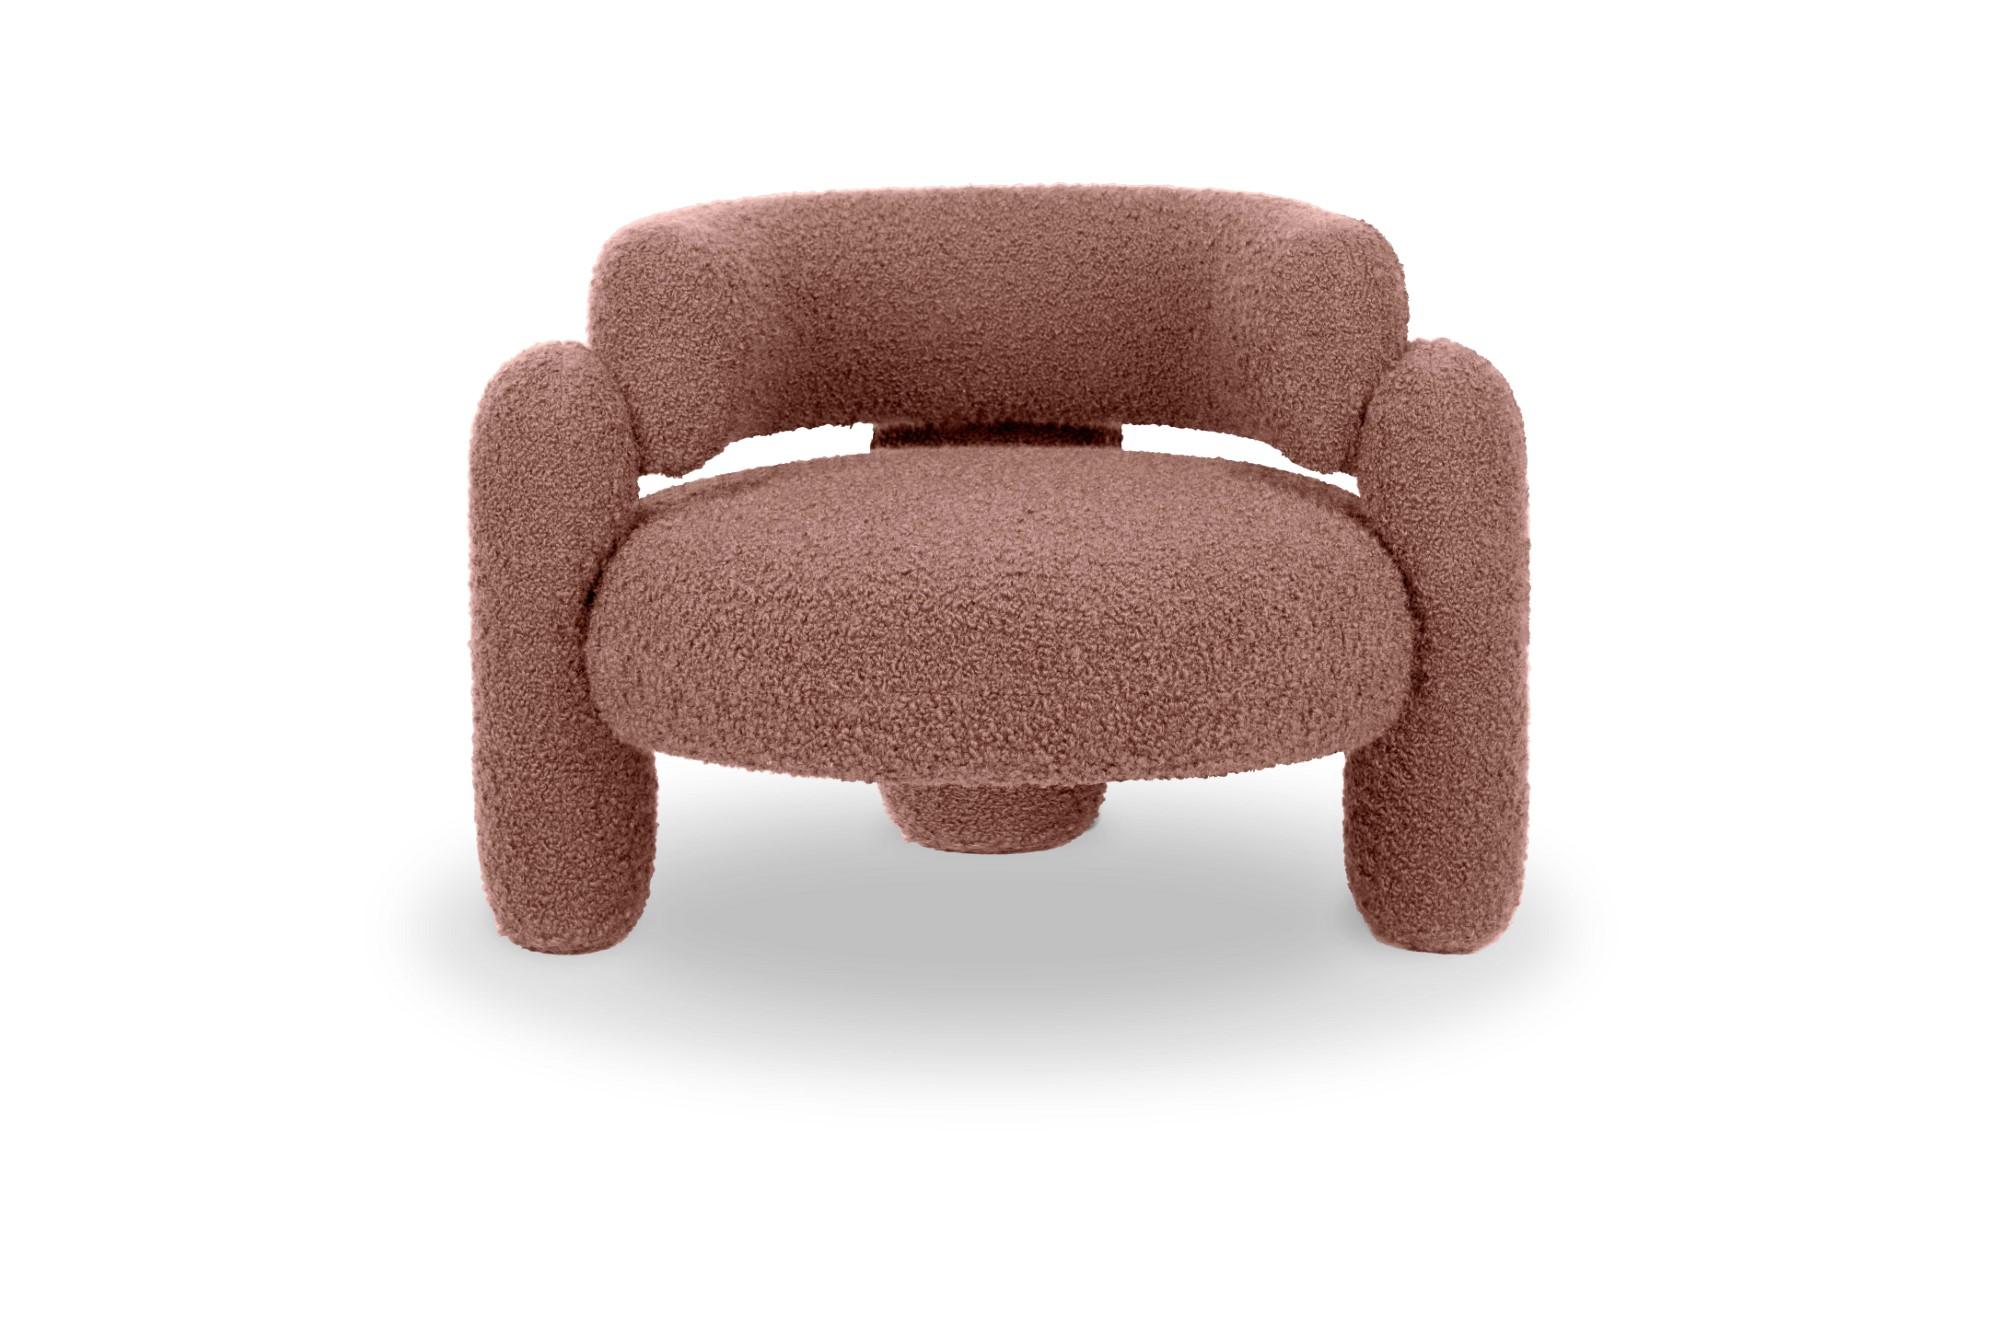 Embrace Cormo blossom armchair by Royal Stranger
Dimensions: W 96 x D 85 x H 68 cm.
Different upholstery colors and finishes are available.
Materials: Upholstery.

Featuring an enfolding composition of geometrical shapes, the Embrace Armchair